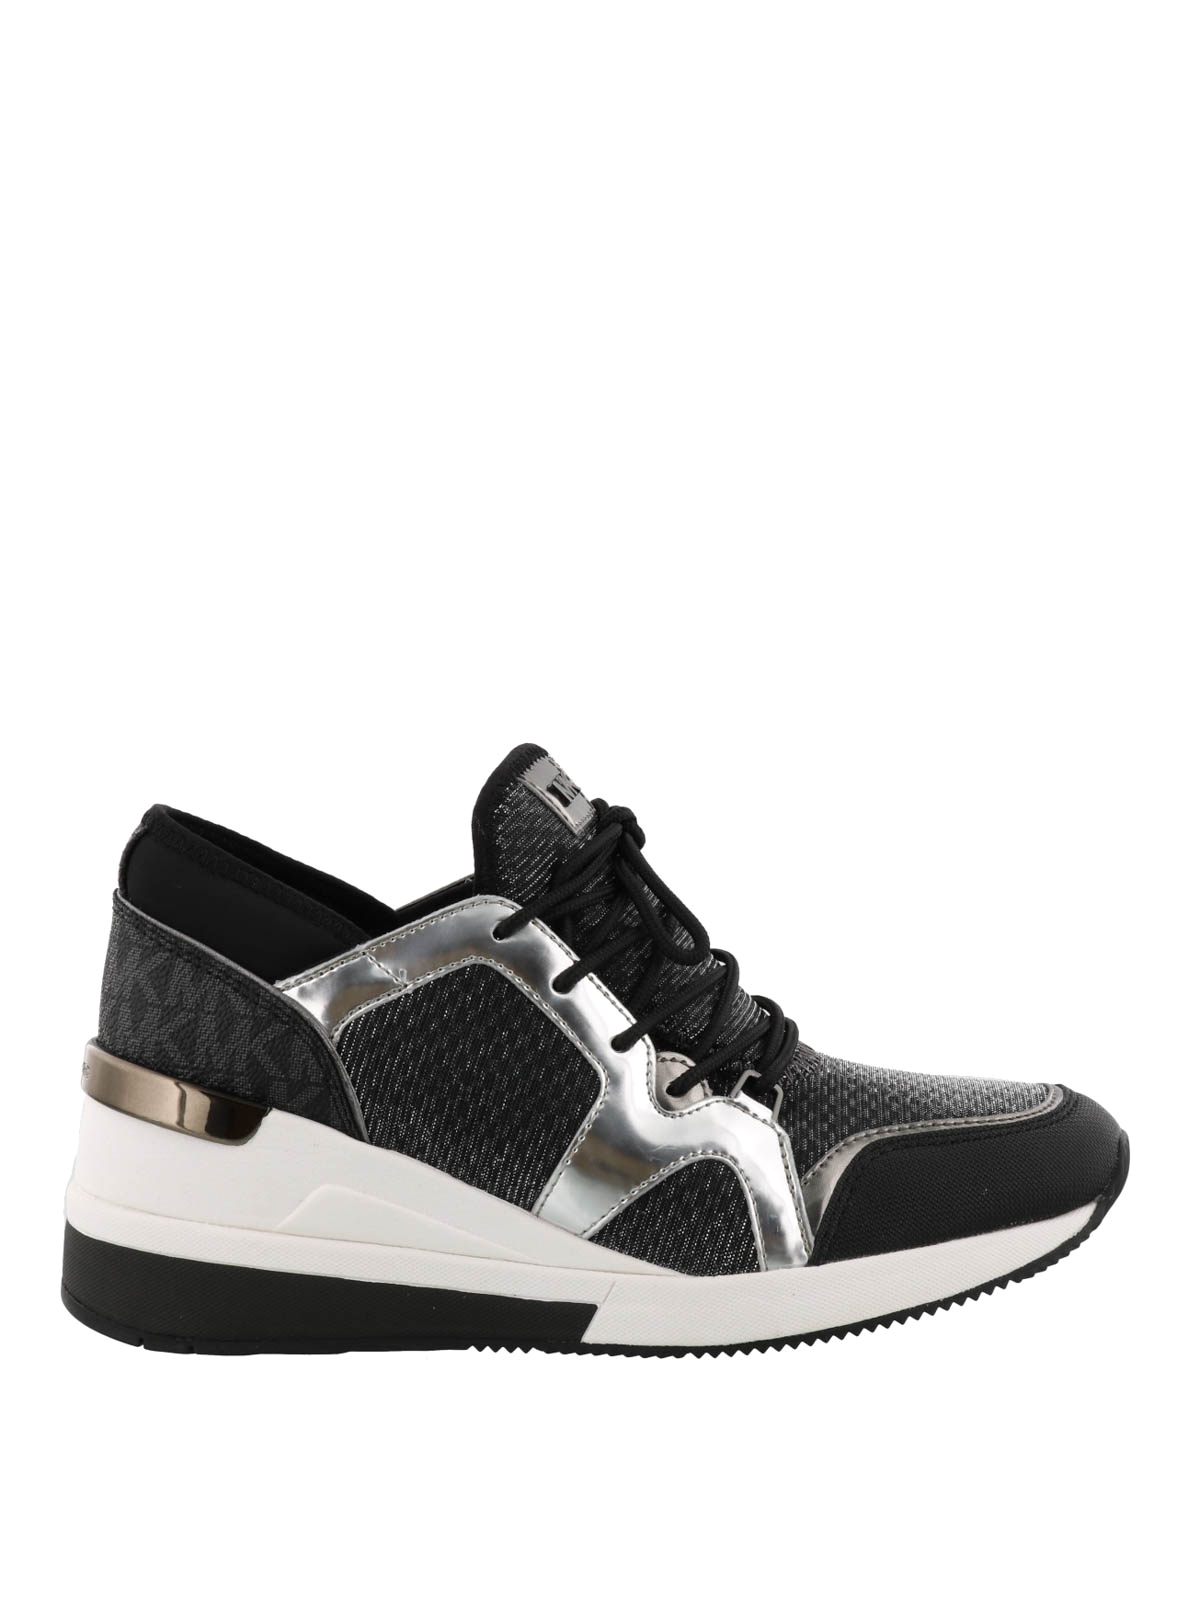 Trainers Michael Kors - Scout sneakers